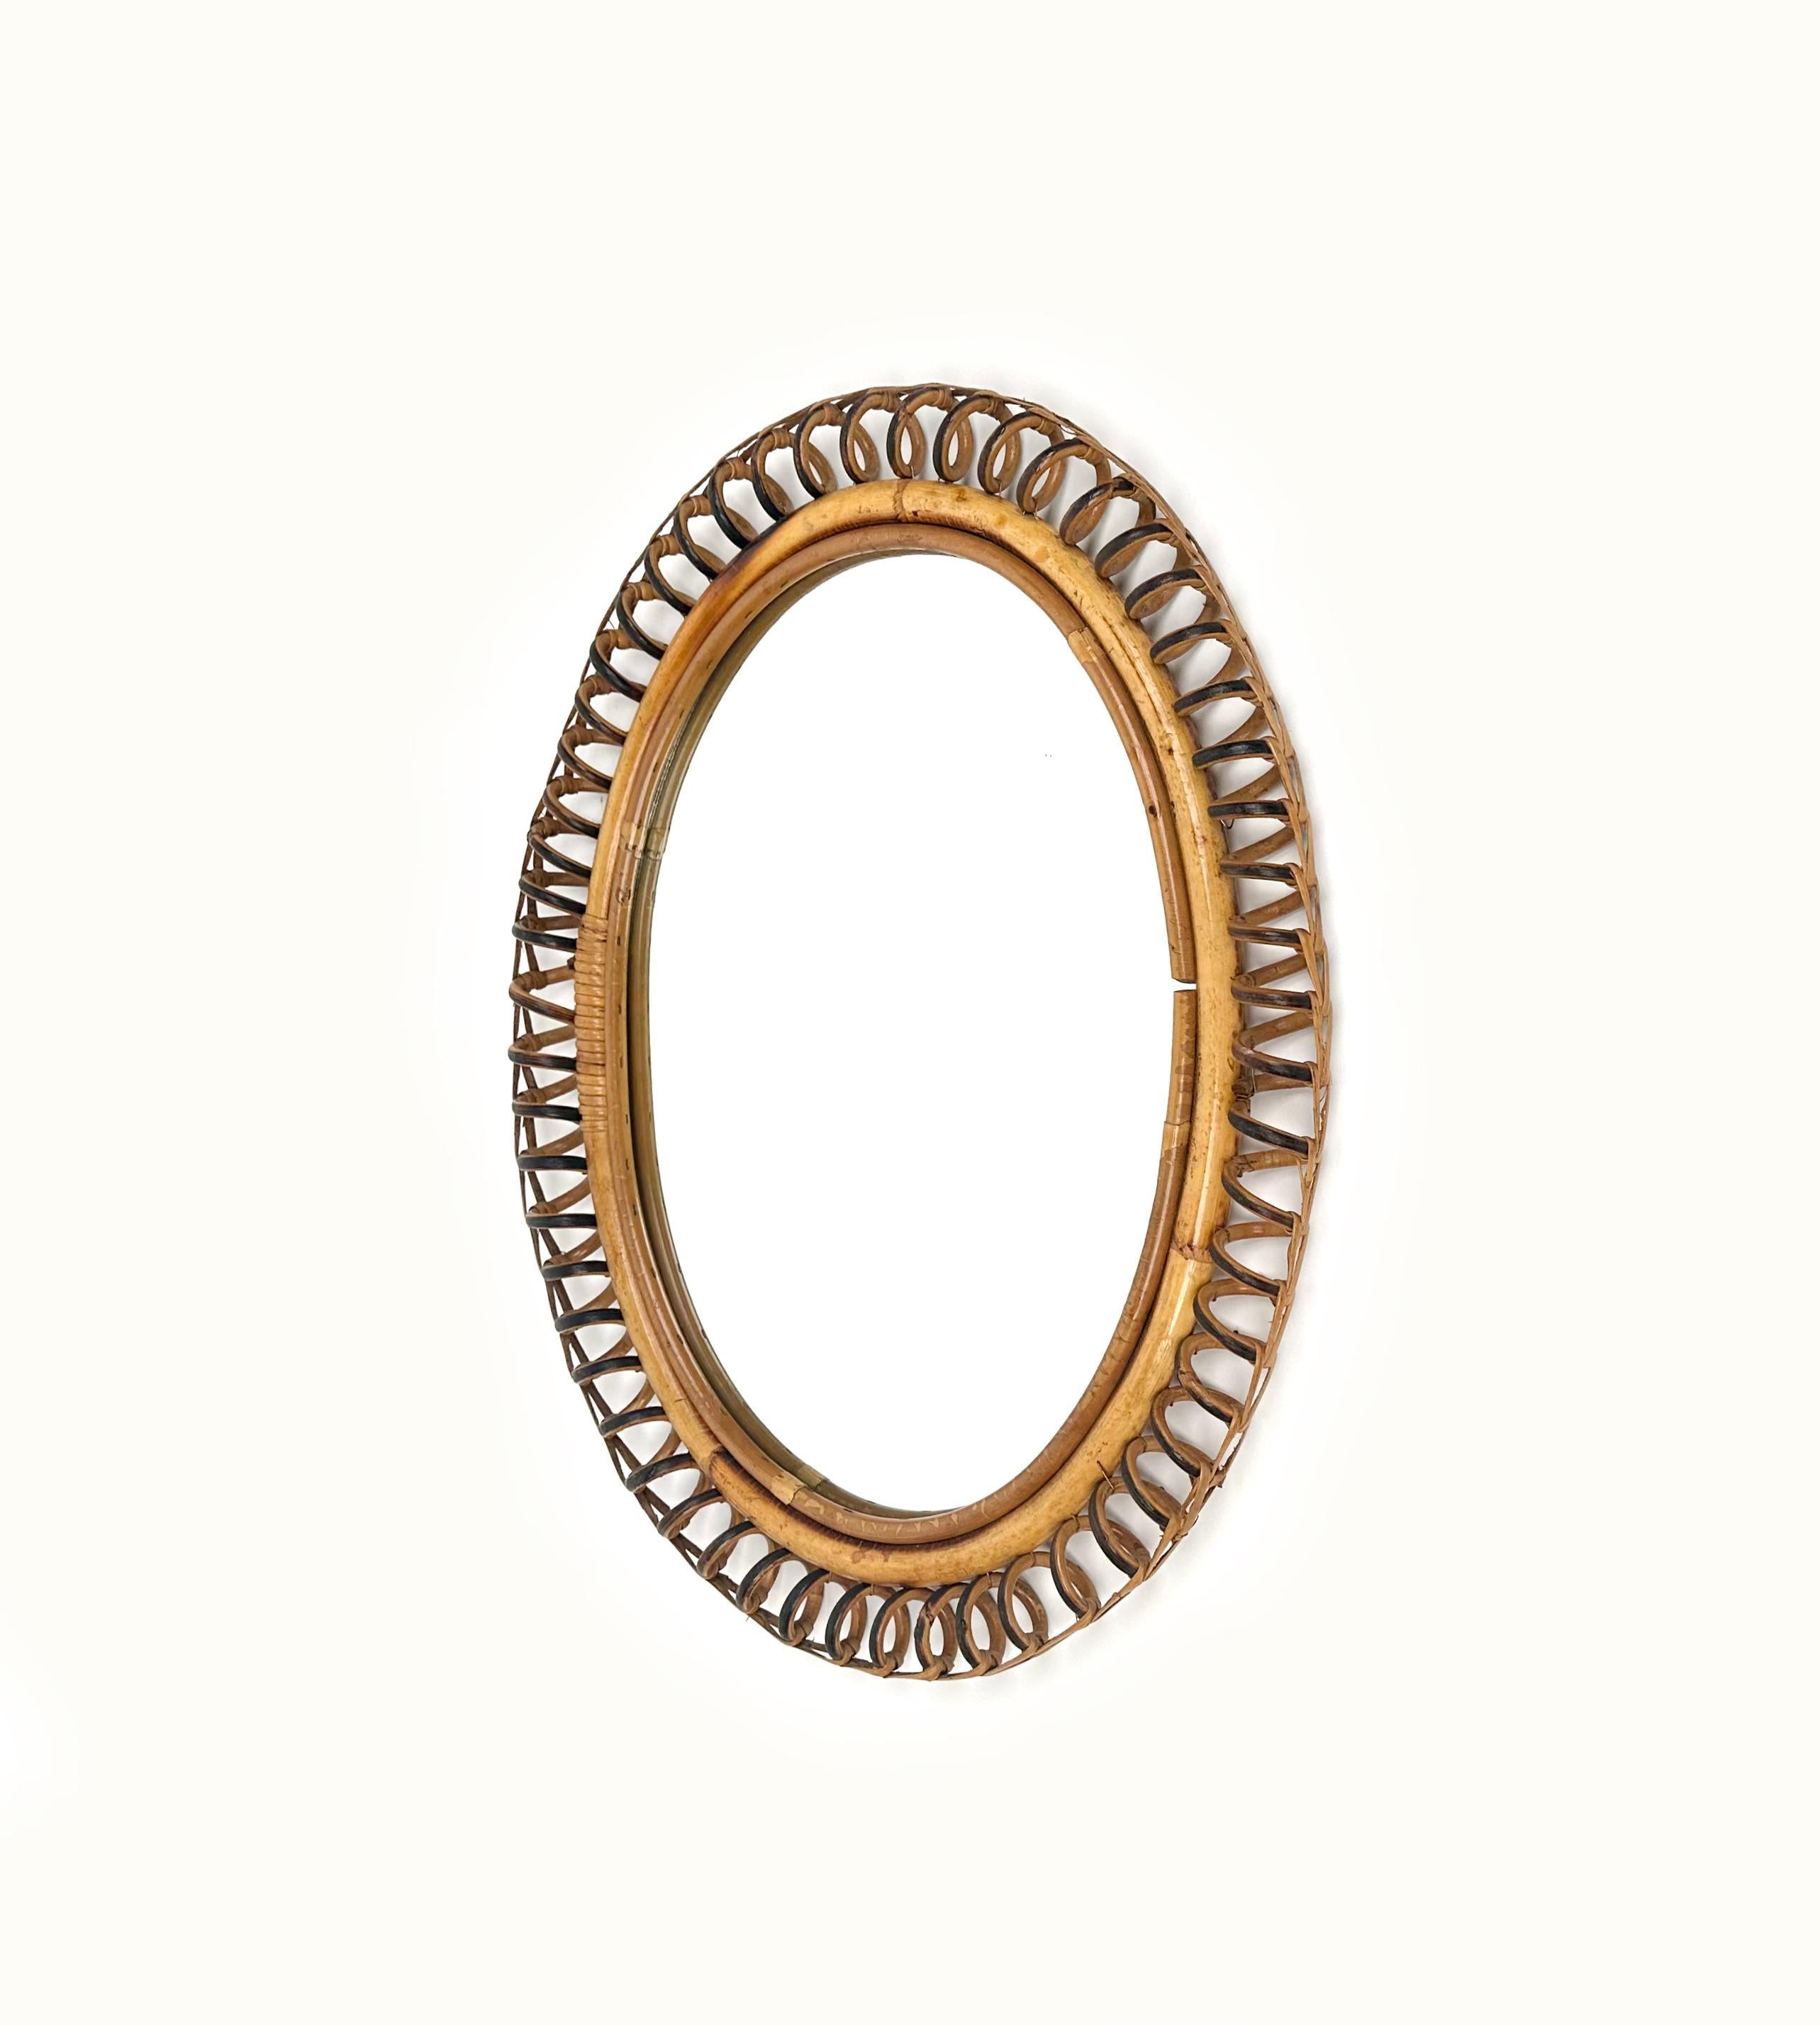 Mid-Century Modern Midcentury Rattan and Bamboo Oval Wall Mirror Franco Albini Style, Italy 1960s For Sale